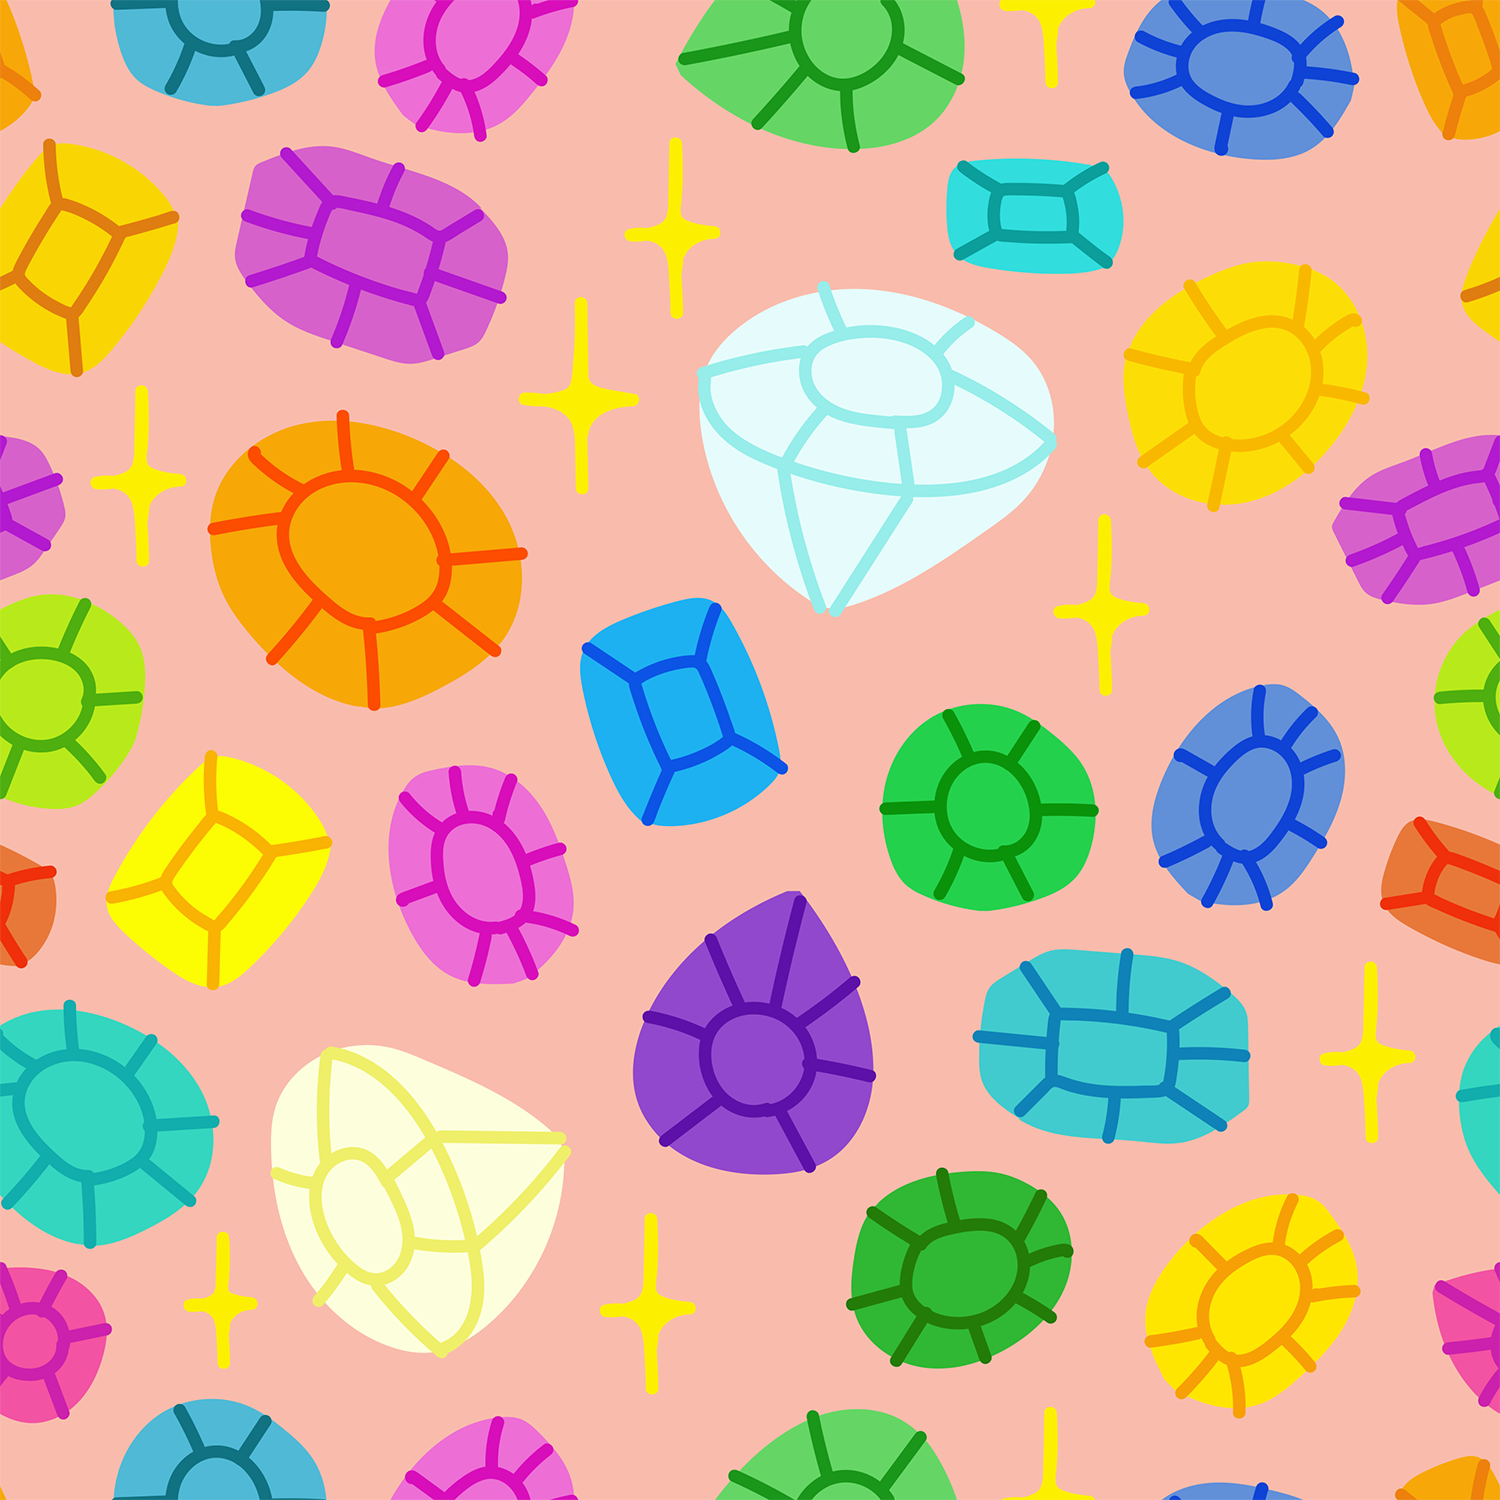 Illustration of a vibrant pattern of multi-colored gems creating a dazzling display of colors and shapes